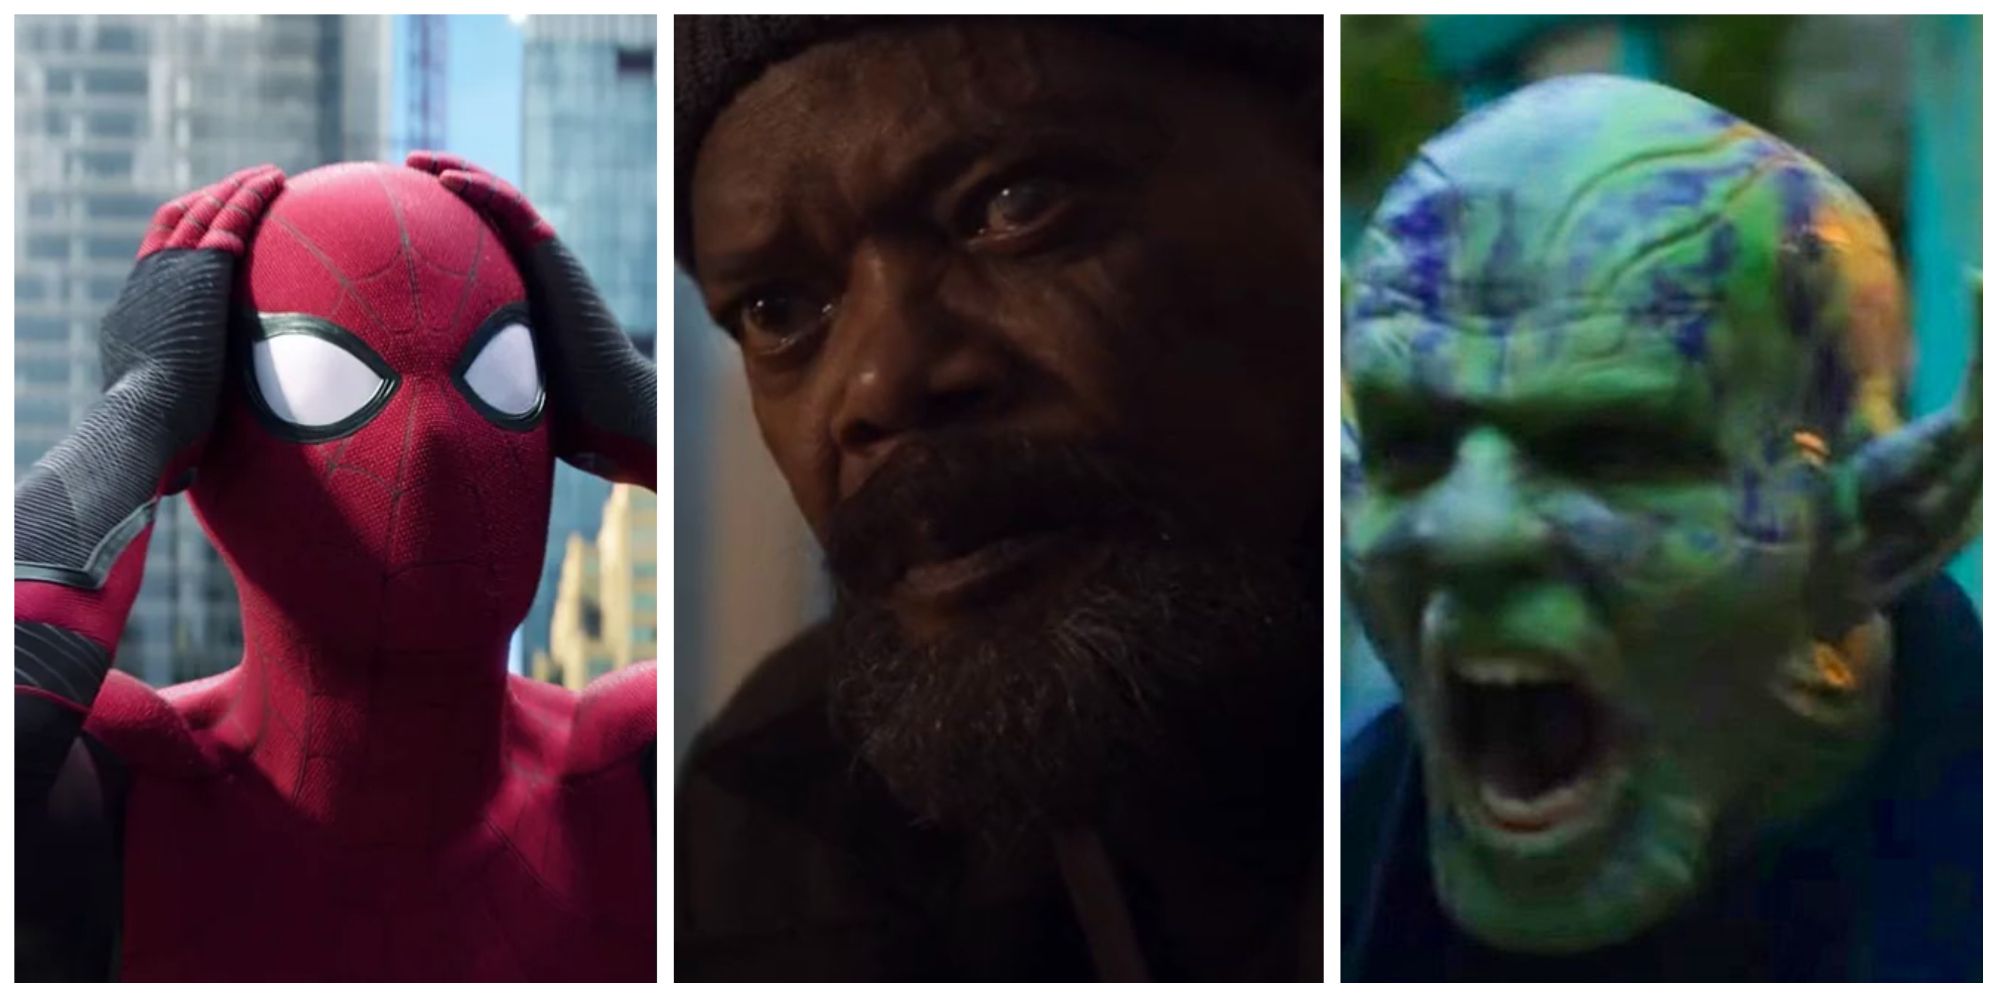 spider-man, nick fury and a skrull from disney plus secret invasion easter eggs